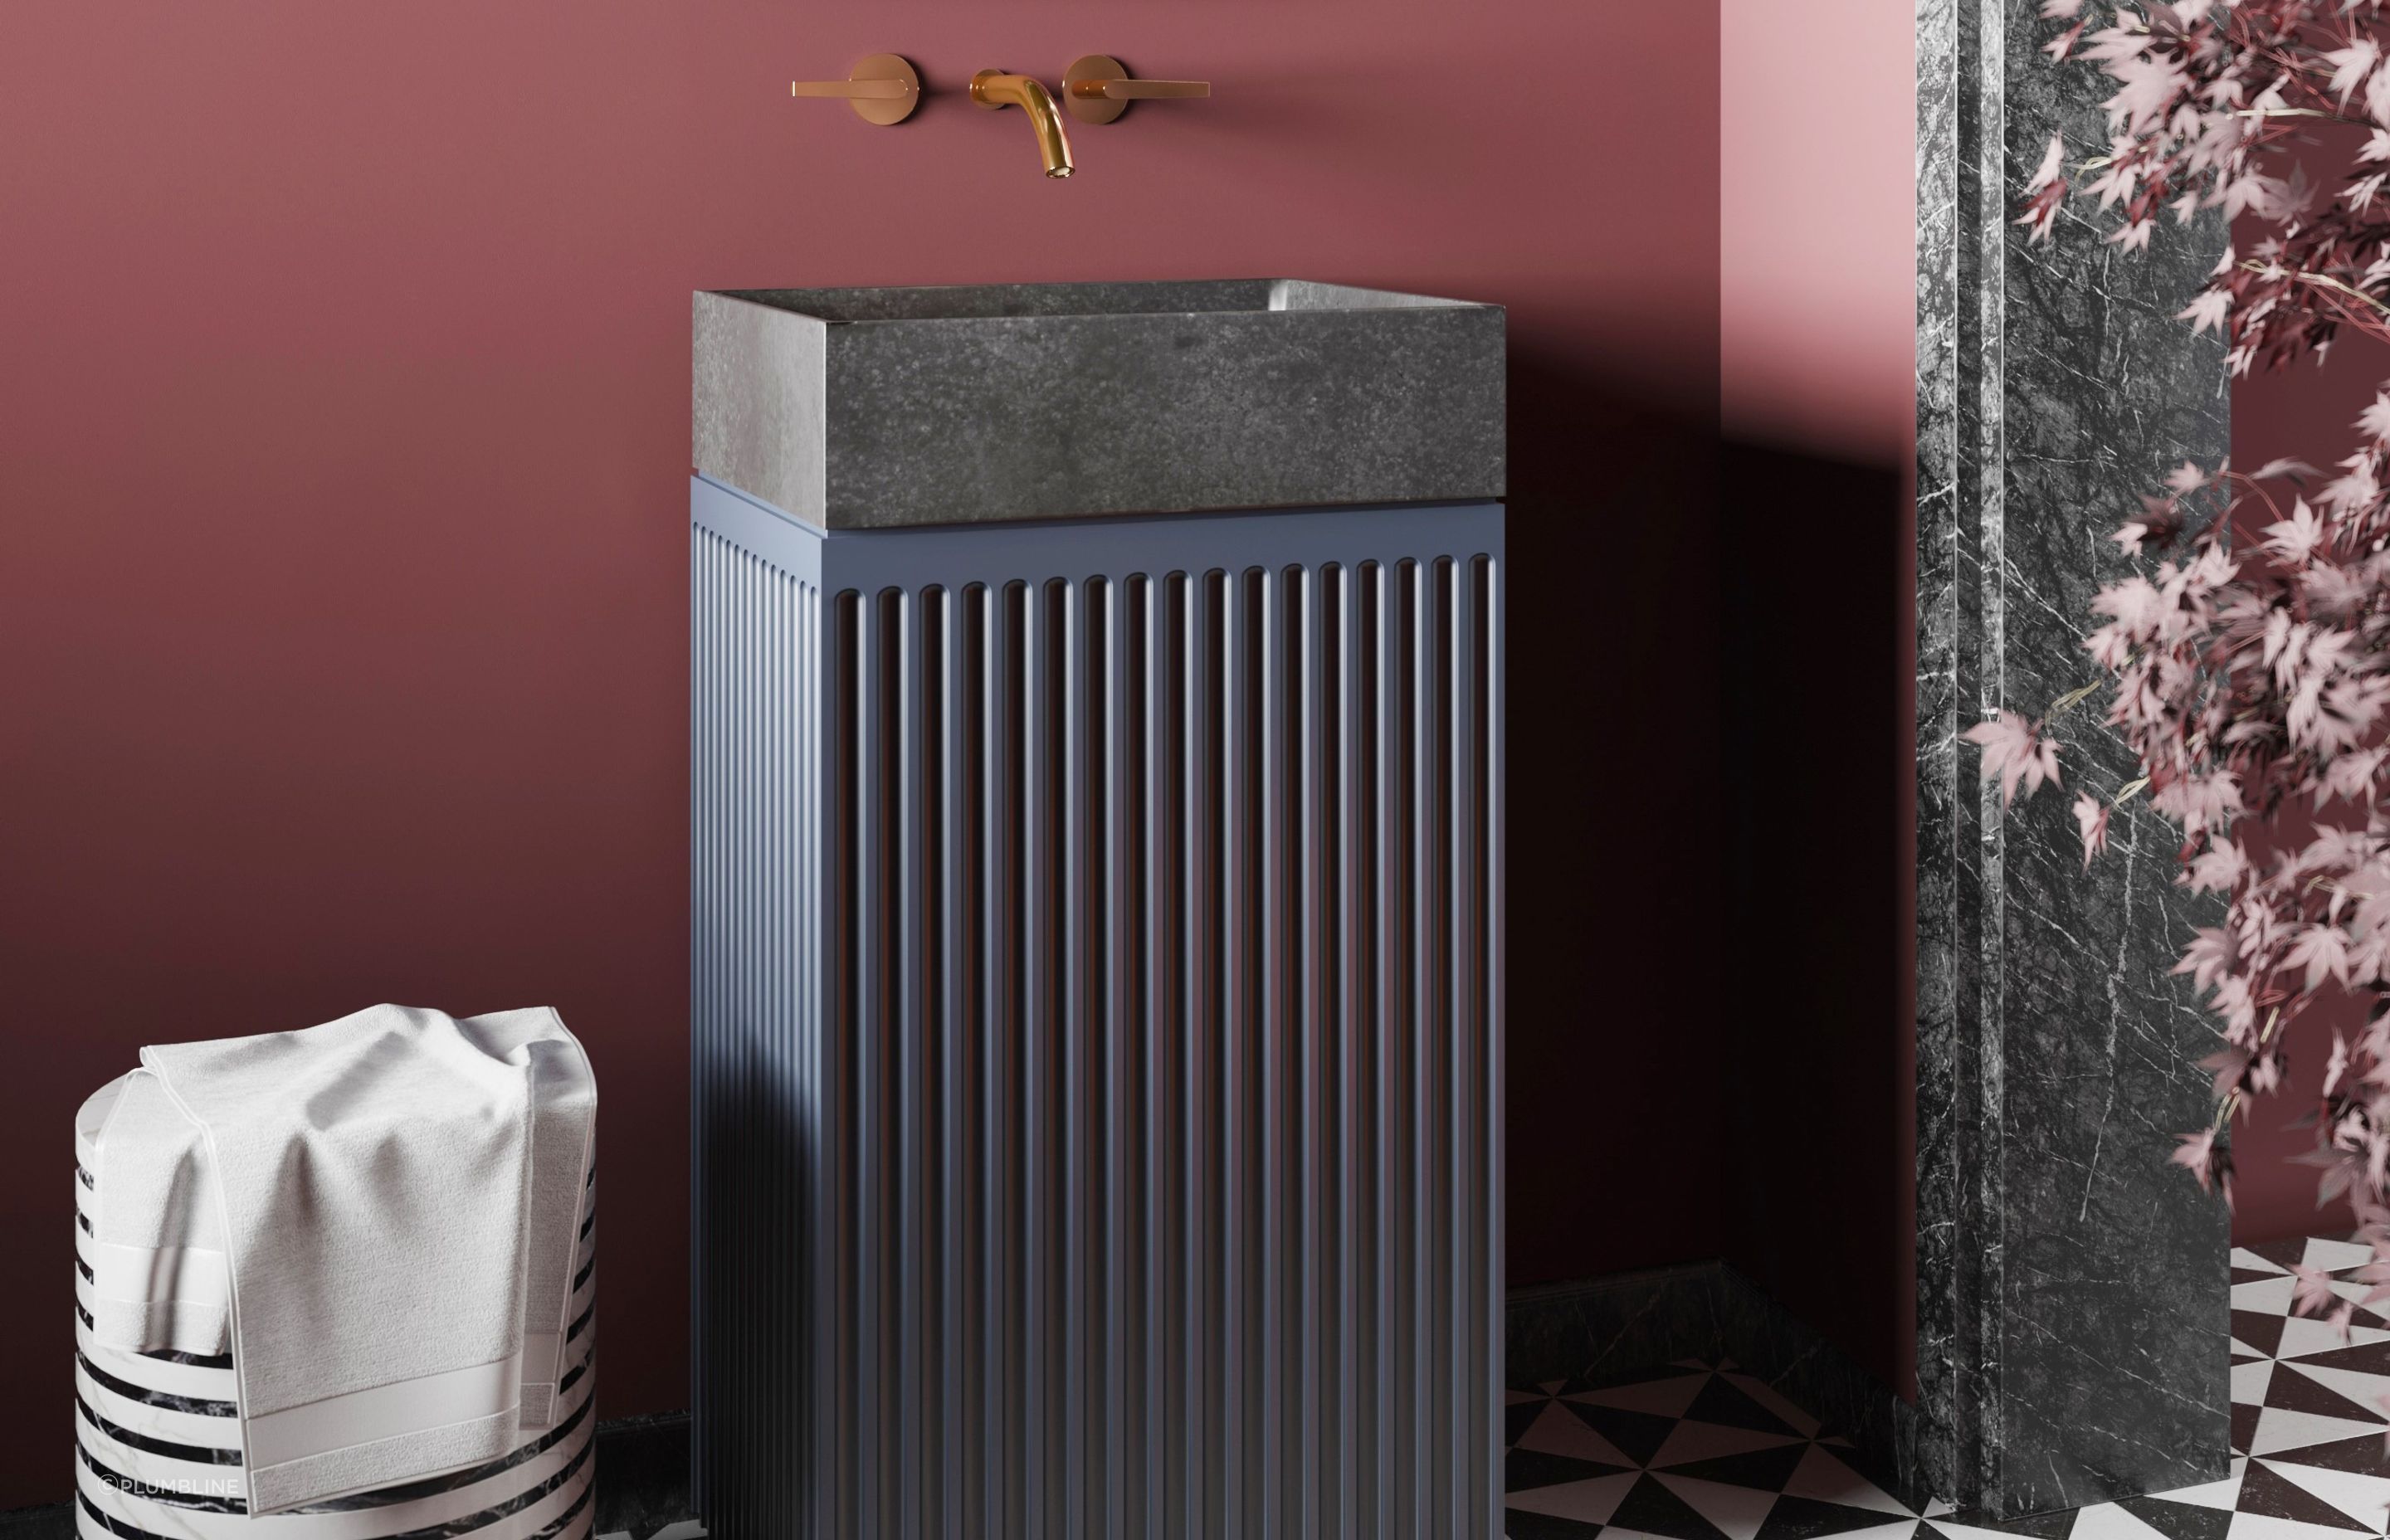 The Doric Colour Pedestal With Basin is a great showpiece for any bathroom.